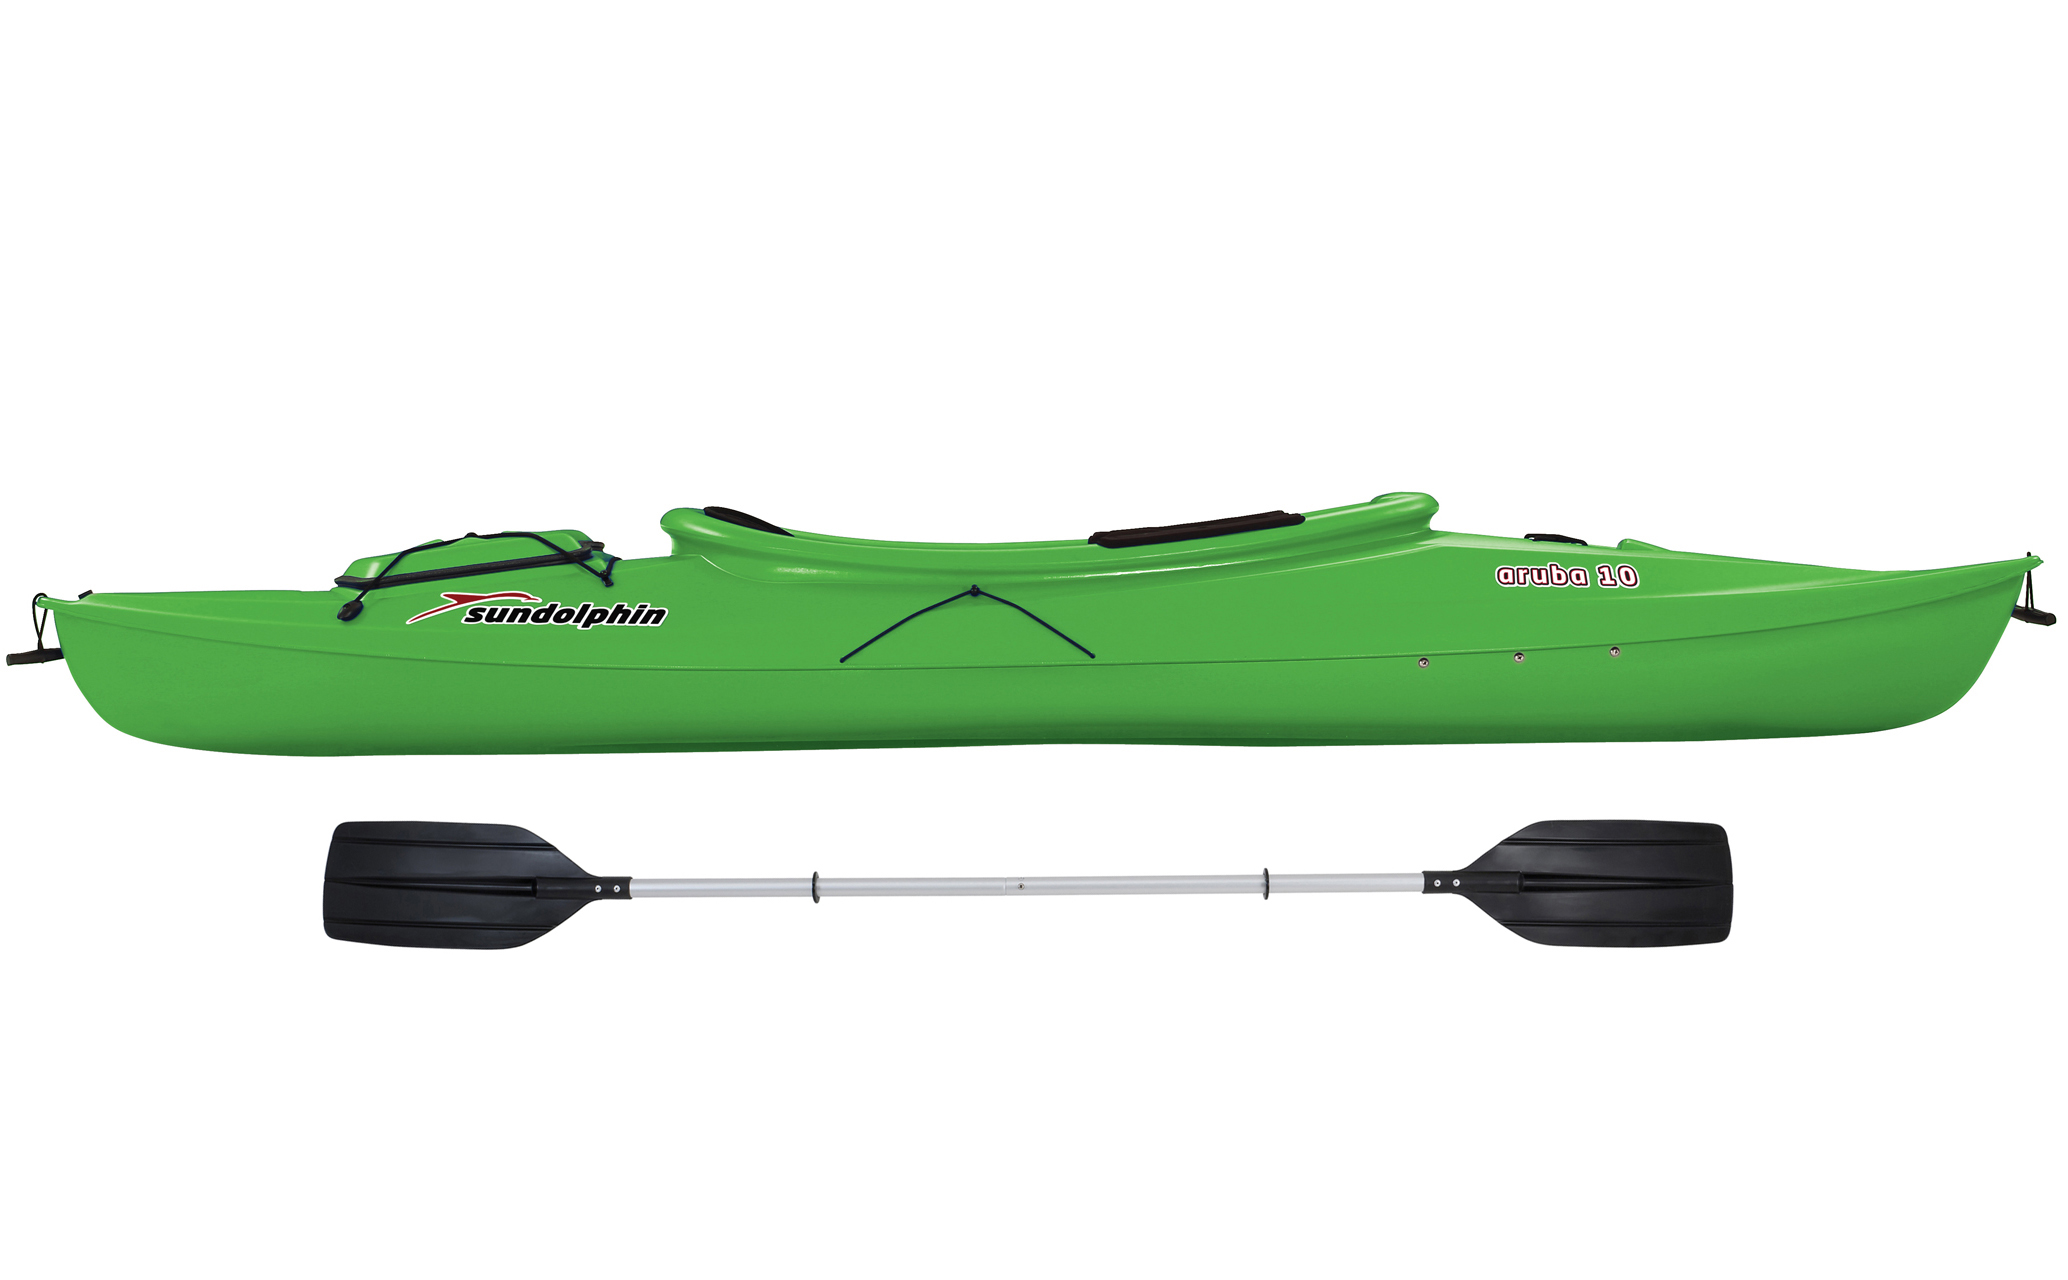 Sun Dolphin Aruba 10' Sit-in Kayak Lime, Paddle Included - image 5 of 5